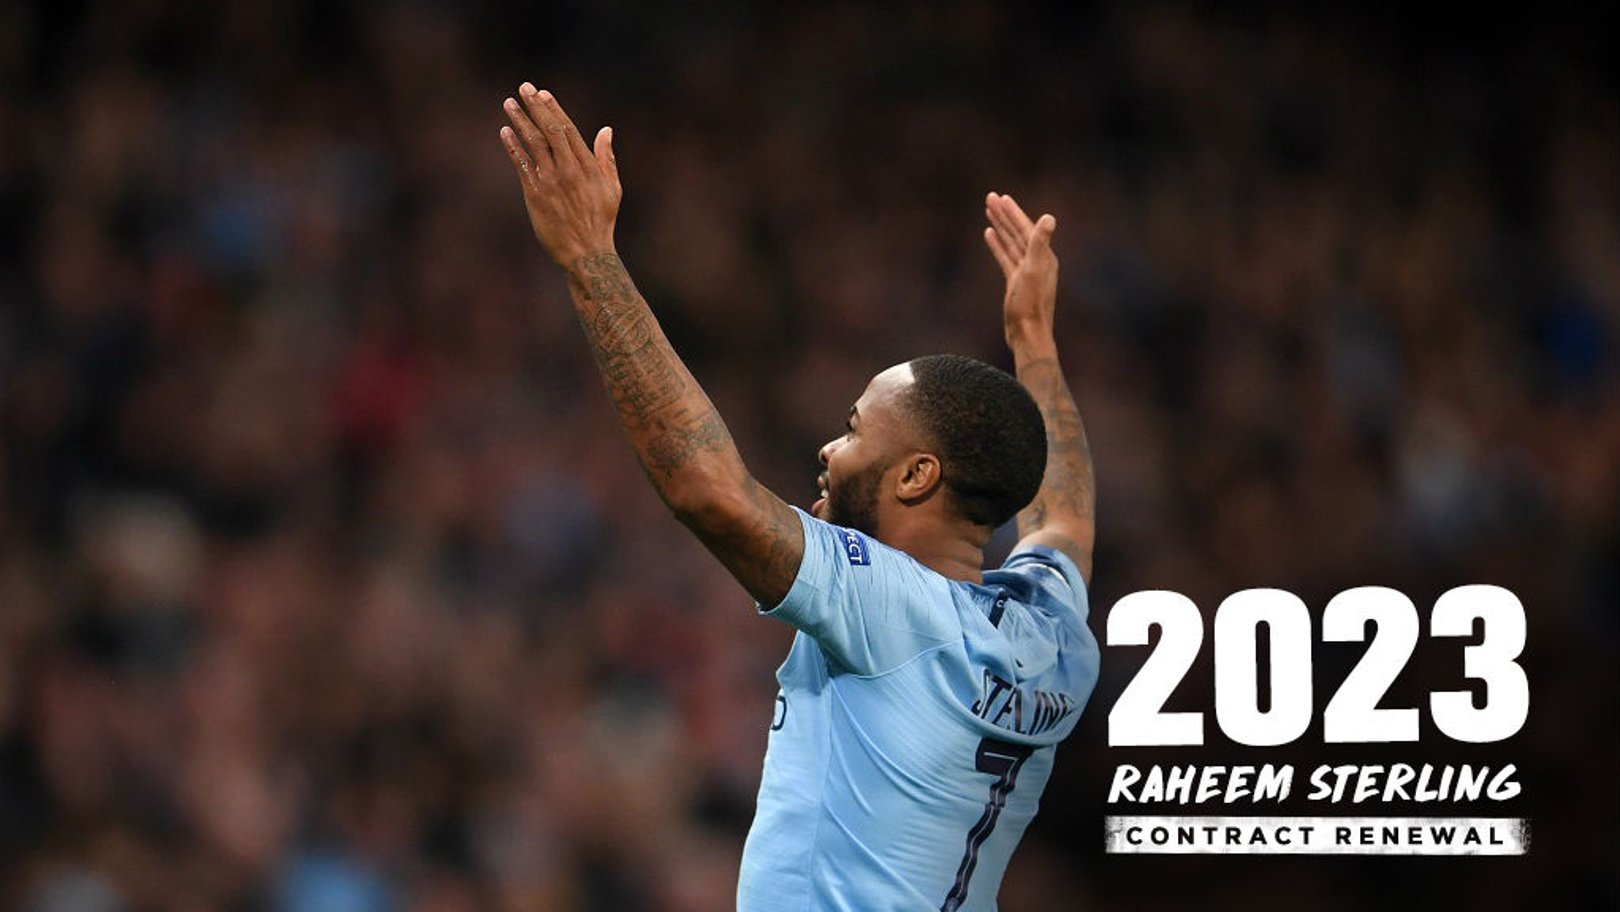 The rise and rise of Raheem Sterling...